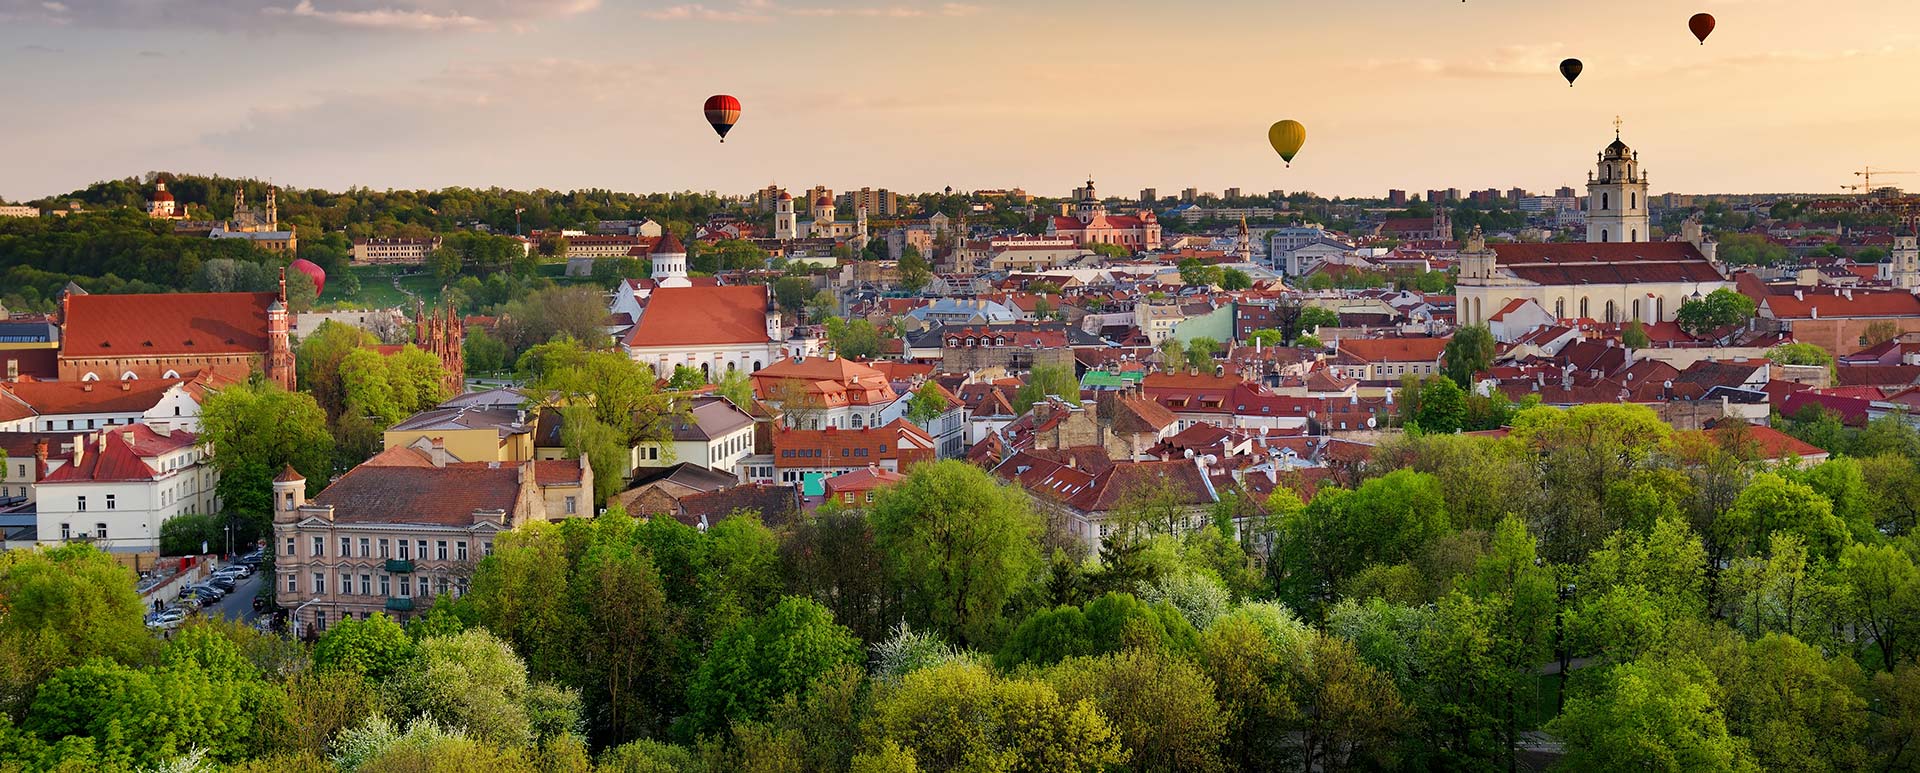 Discounted flight tickets to Lithuania - IFlyFirstClass